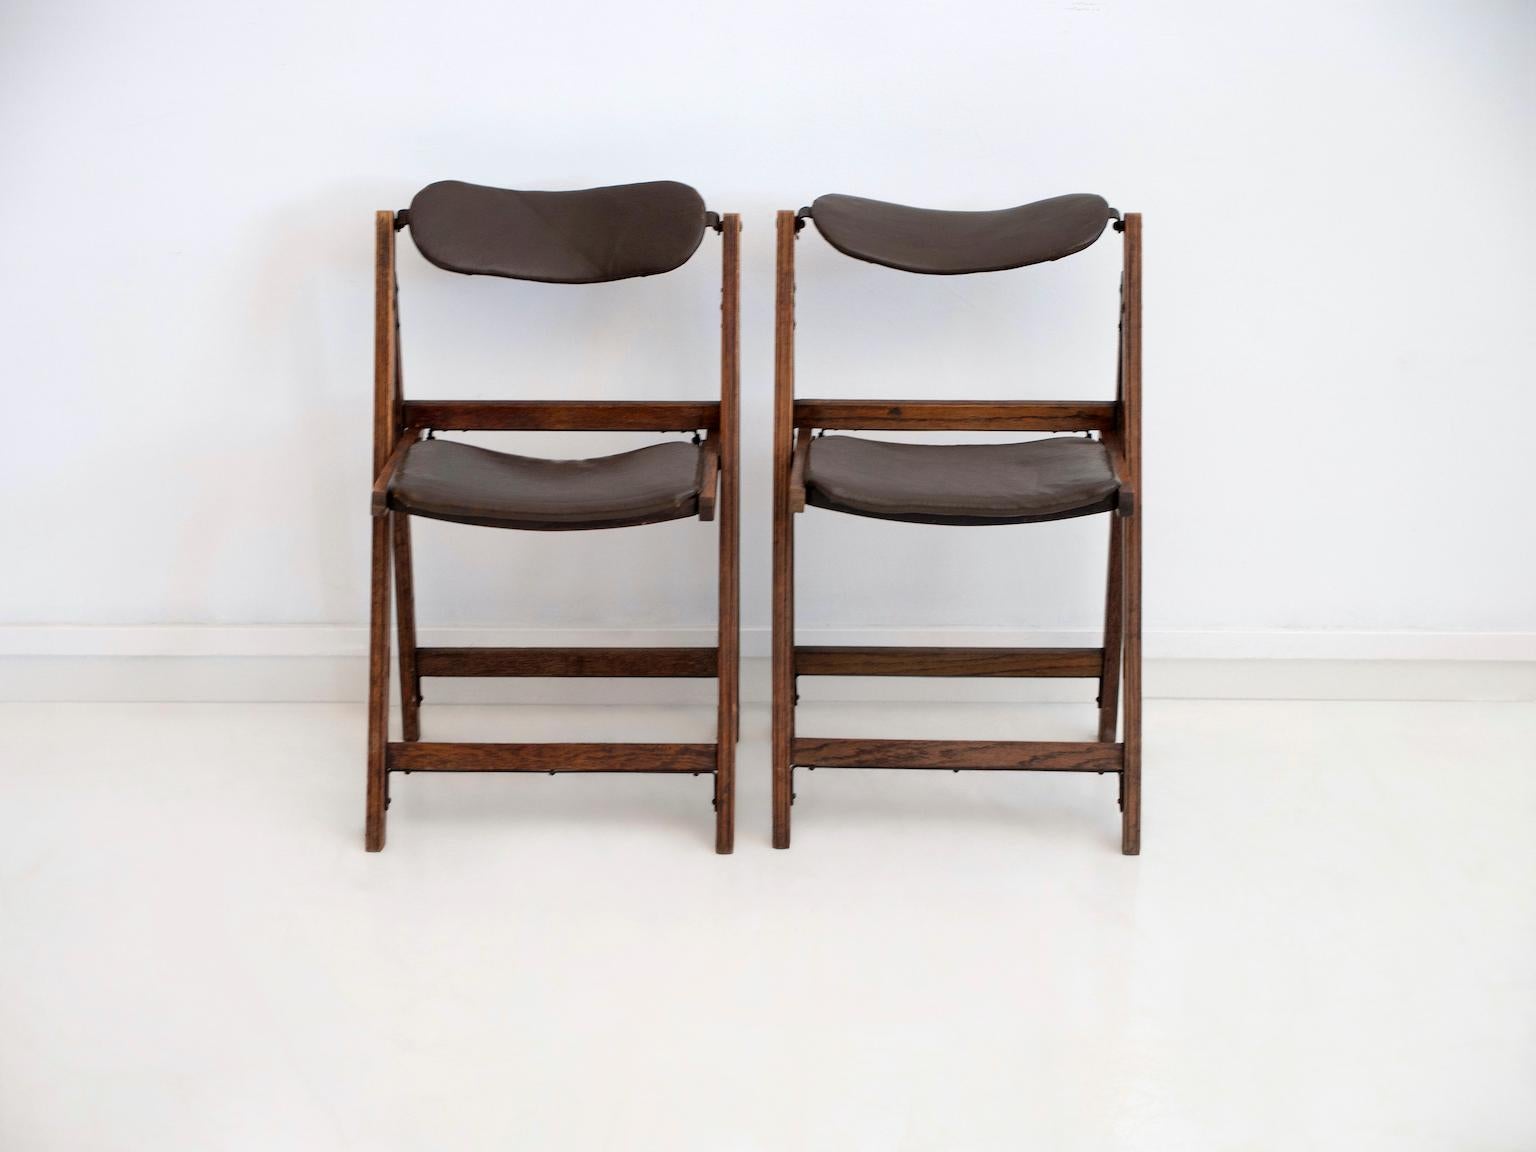 Rustic Pair of Brown Folding Chairs with Oak Frame